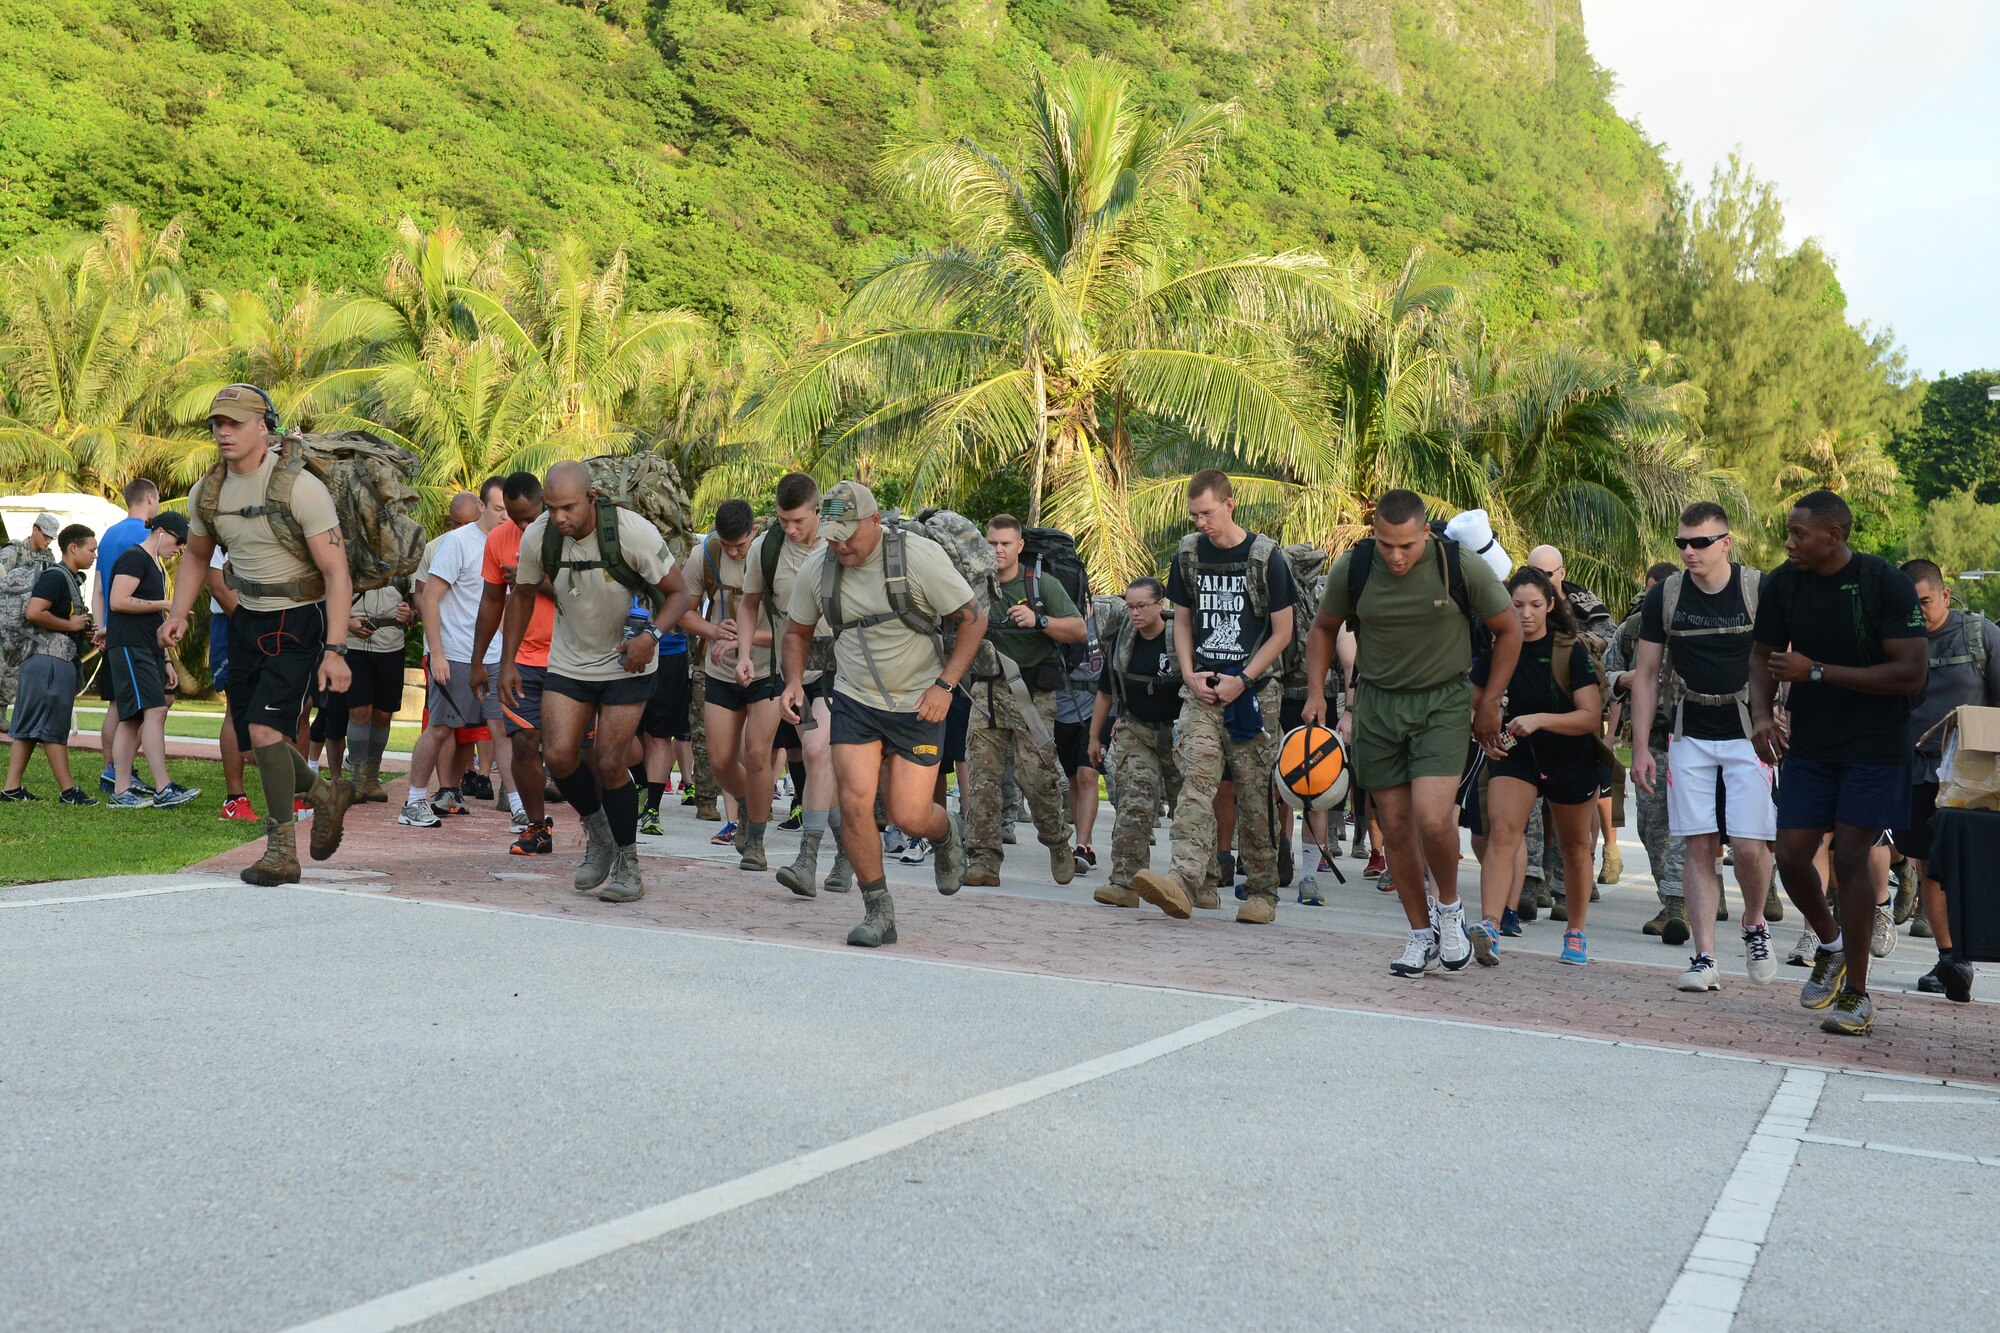 Participants start the race during the POW/MIA memorial ruck march Sept. 16, 2015, at Tarague Beach on Andersen Air Force Base, Guam. Approximately 100 participants attended the ruck march to honor prisoners of war and service members missing in action. (U.S. Air Force photo by Airman 1st Class Arielle Vasquez/Released)